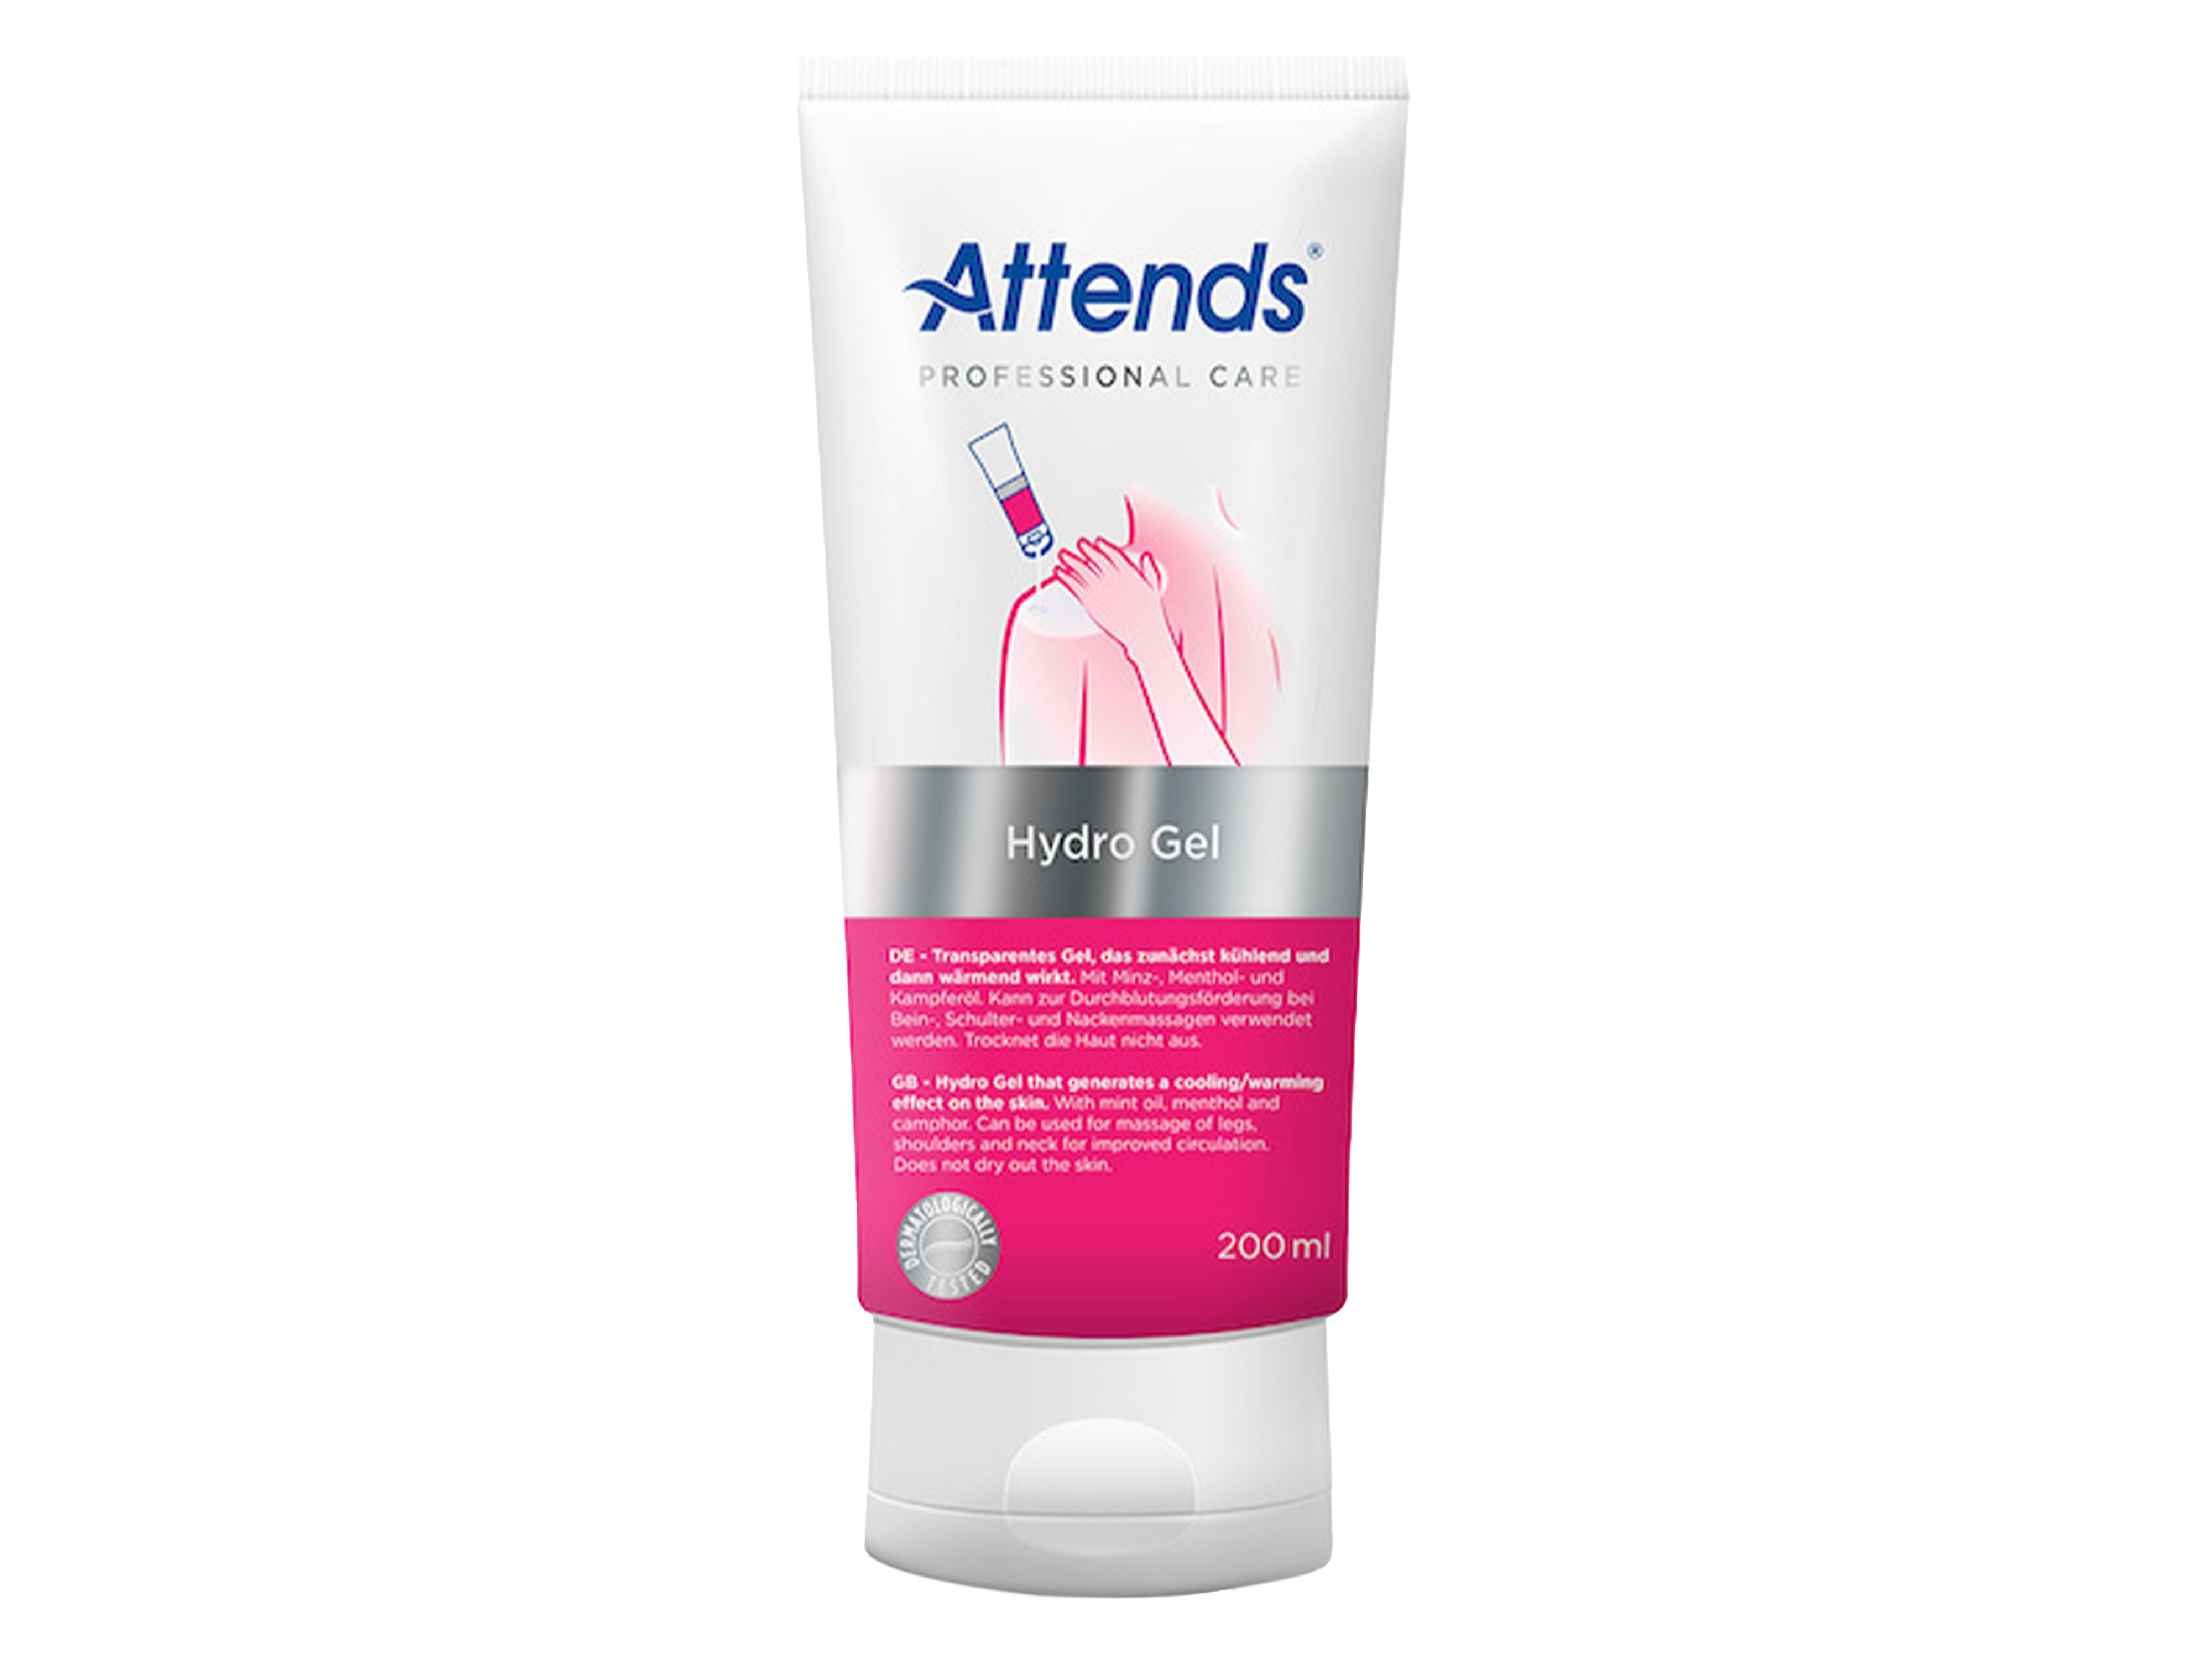 Attends Professional Care Hydro Gel, 200 ml